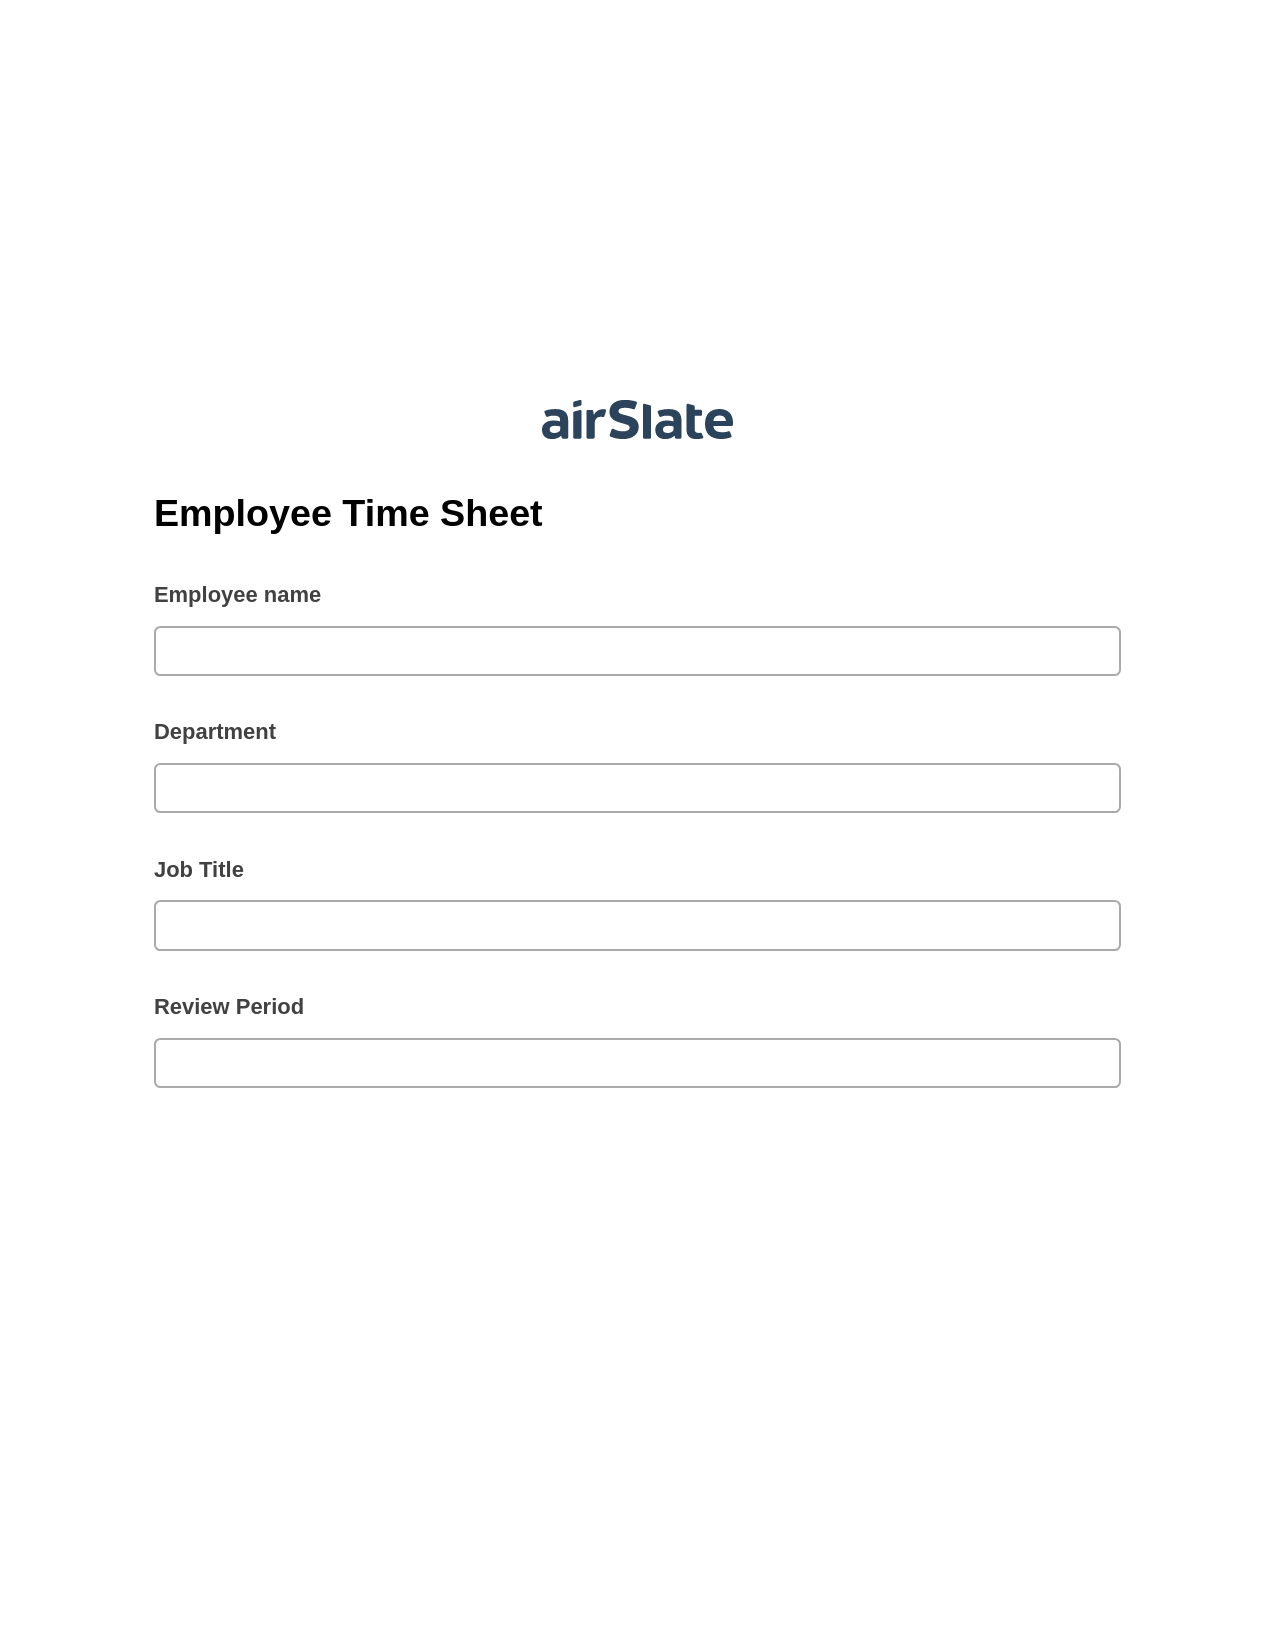 Employee Time Sheet Pre-fill Dropdowns from Google Sheet Bot, Create slate addon, Export to NetSuite Bot